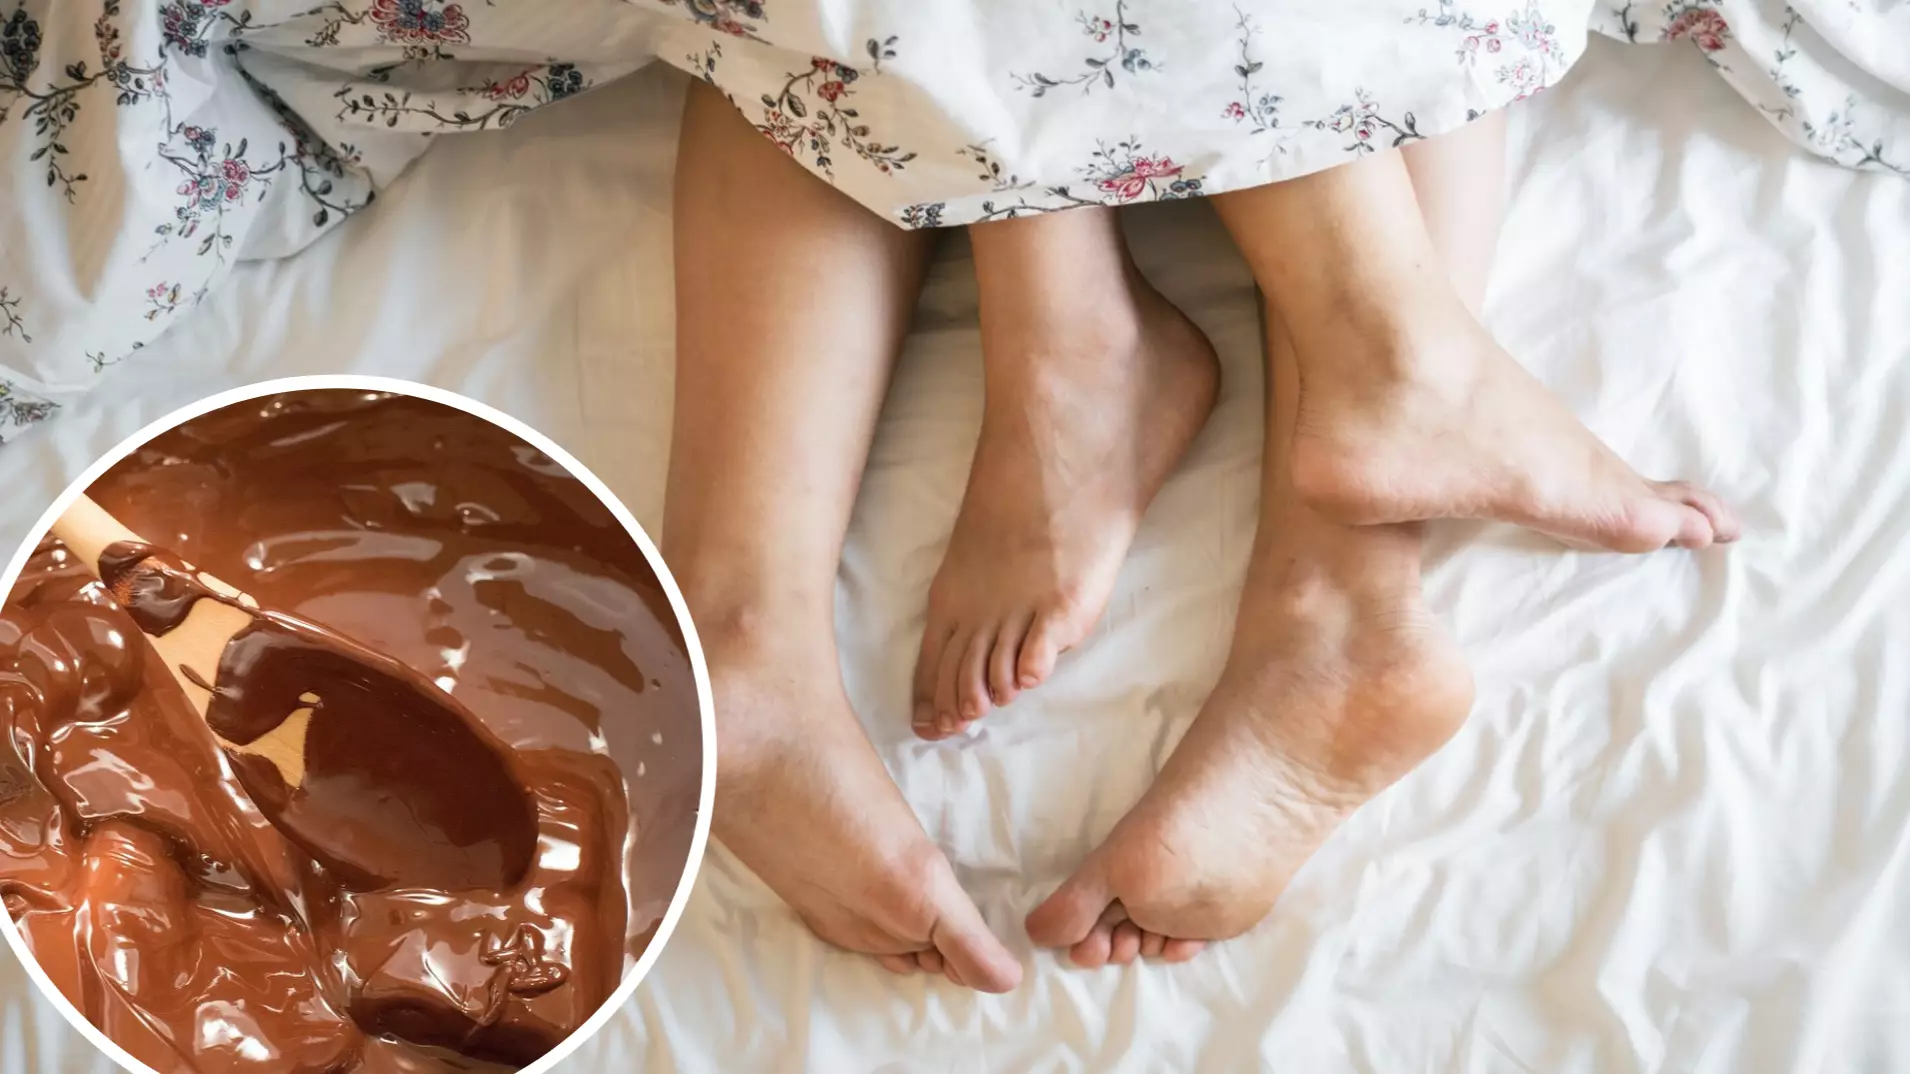 Doctor Warns Against Putting Chocolate In Your Vagina